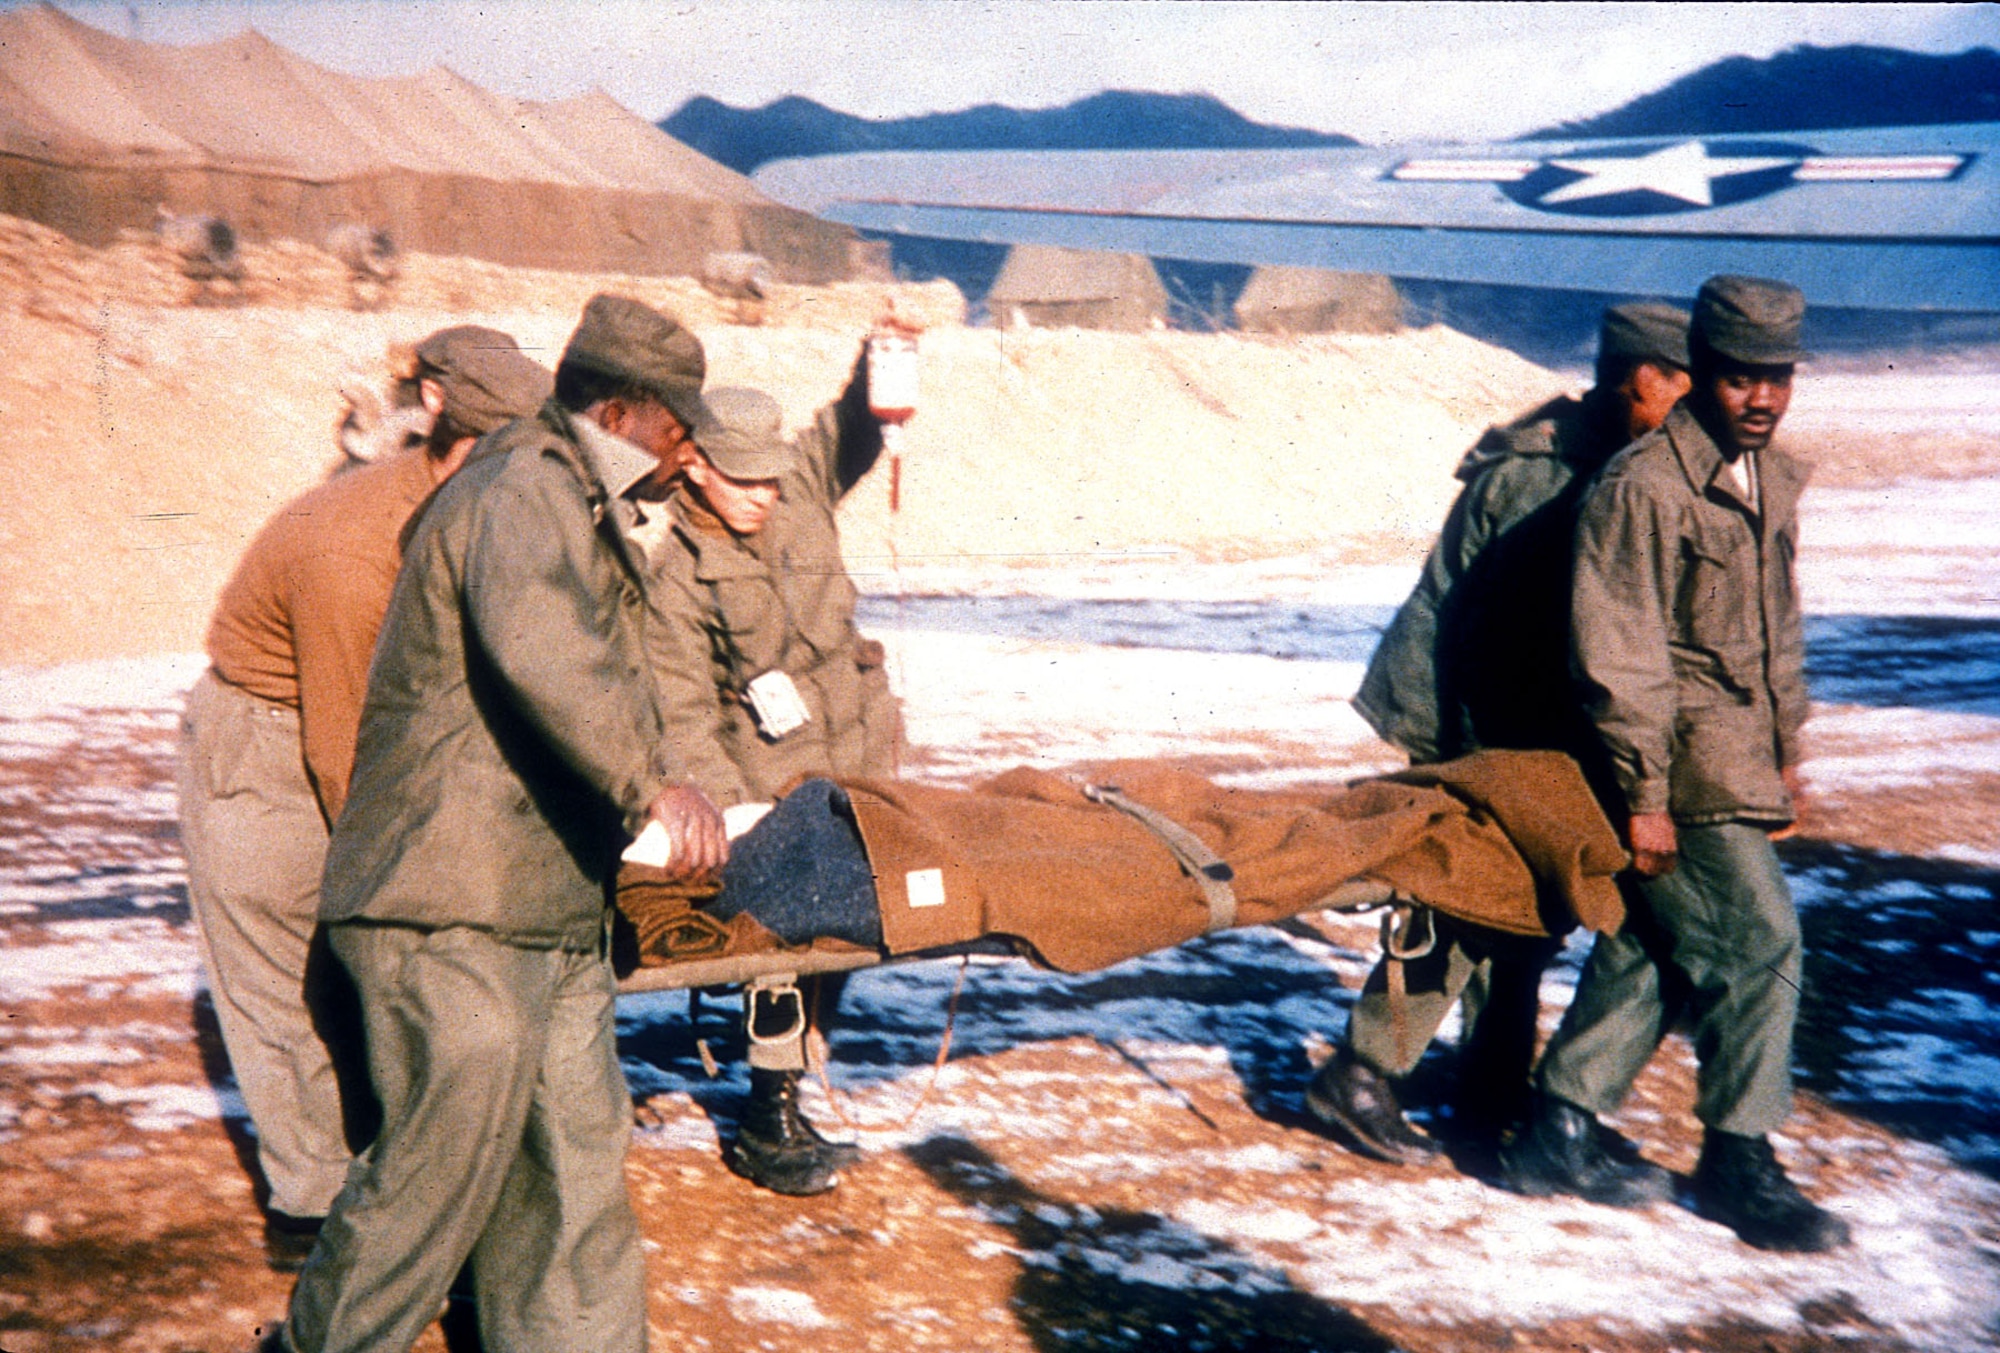 U.S. Airmen move a wounded patient during the Korean War. Speedy evacuation by air cut the casualty death rate by half since World War II. (U.S. Air Force photo)